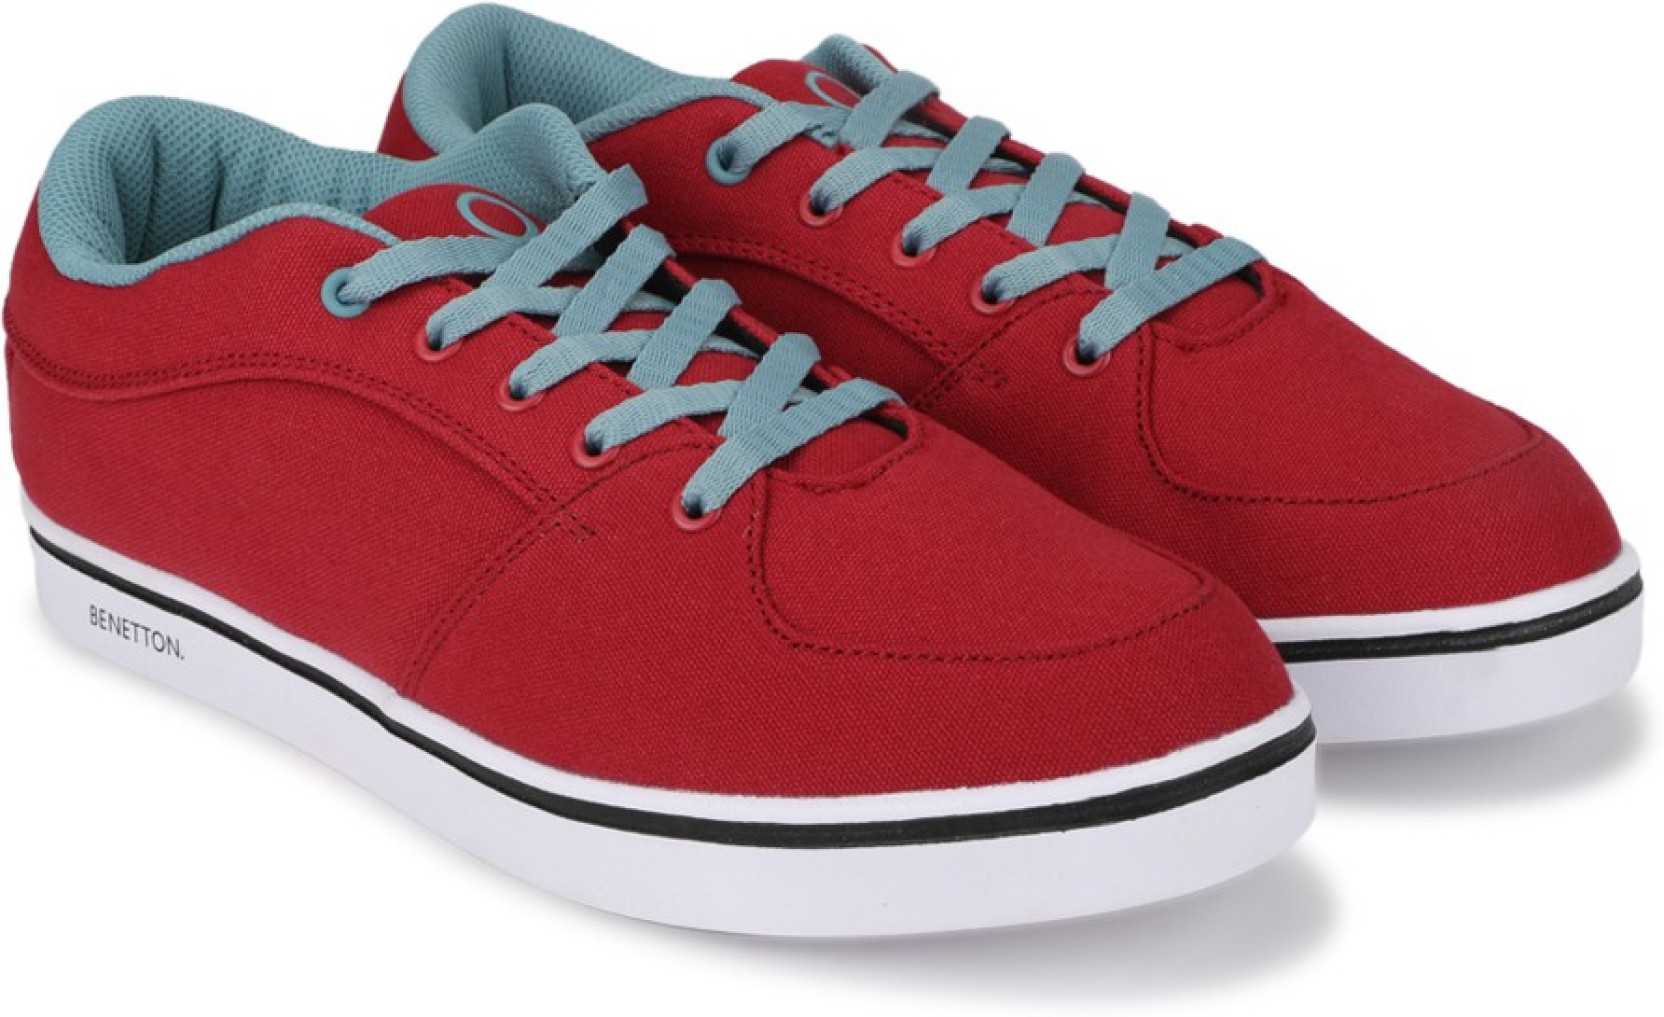 United Colors of Benetton. 16A8CORE1001I Canvas Sneakers - Buy Red ...